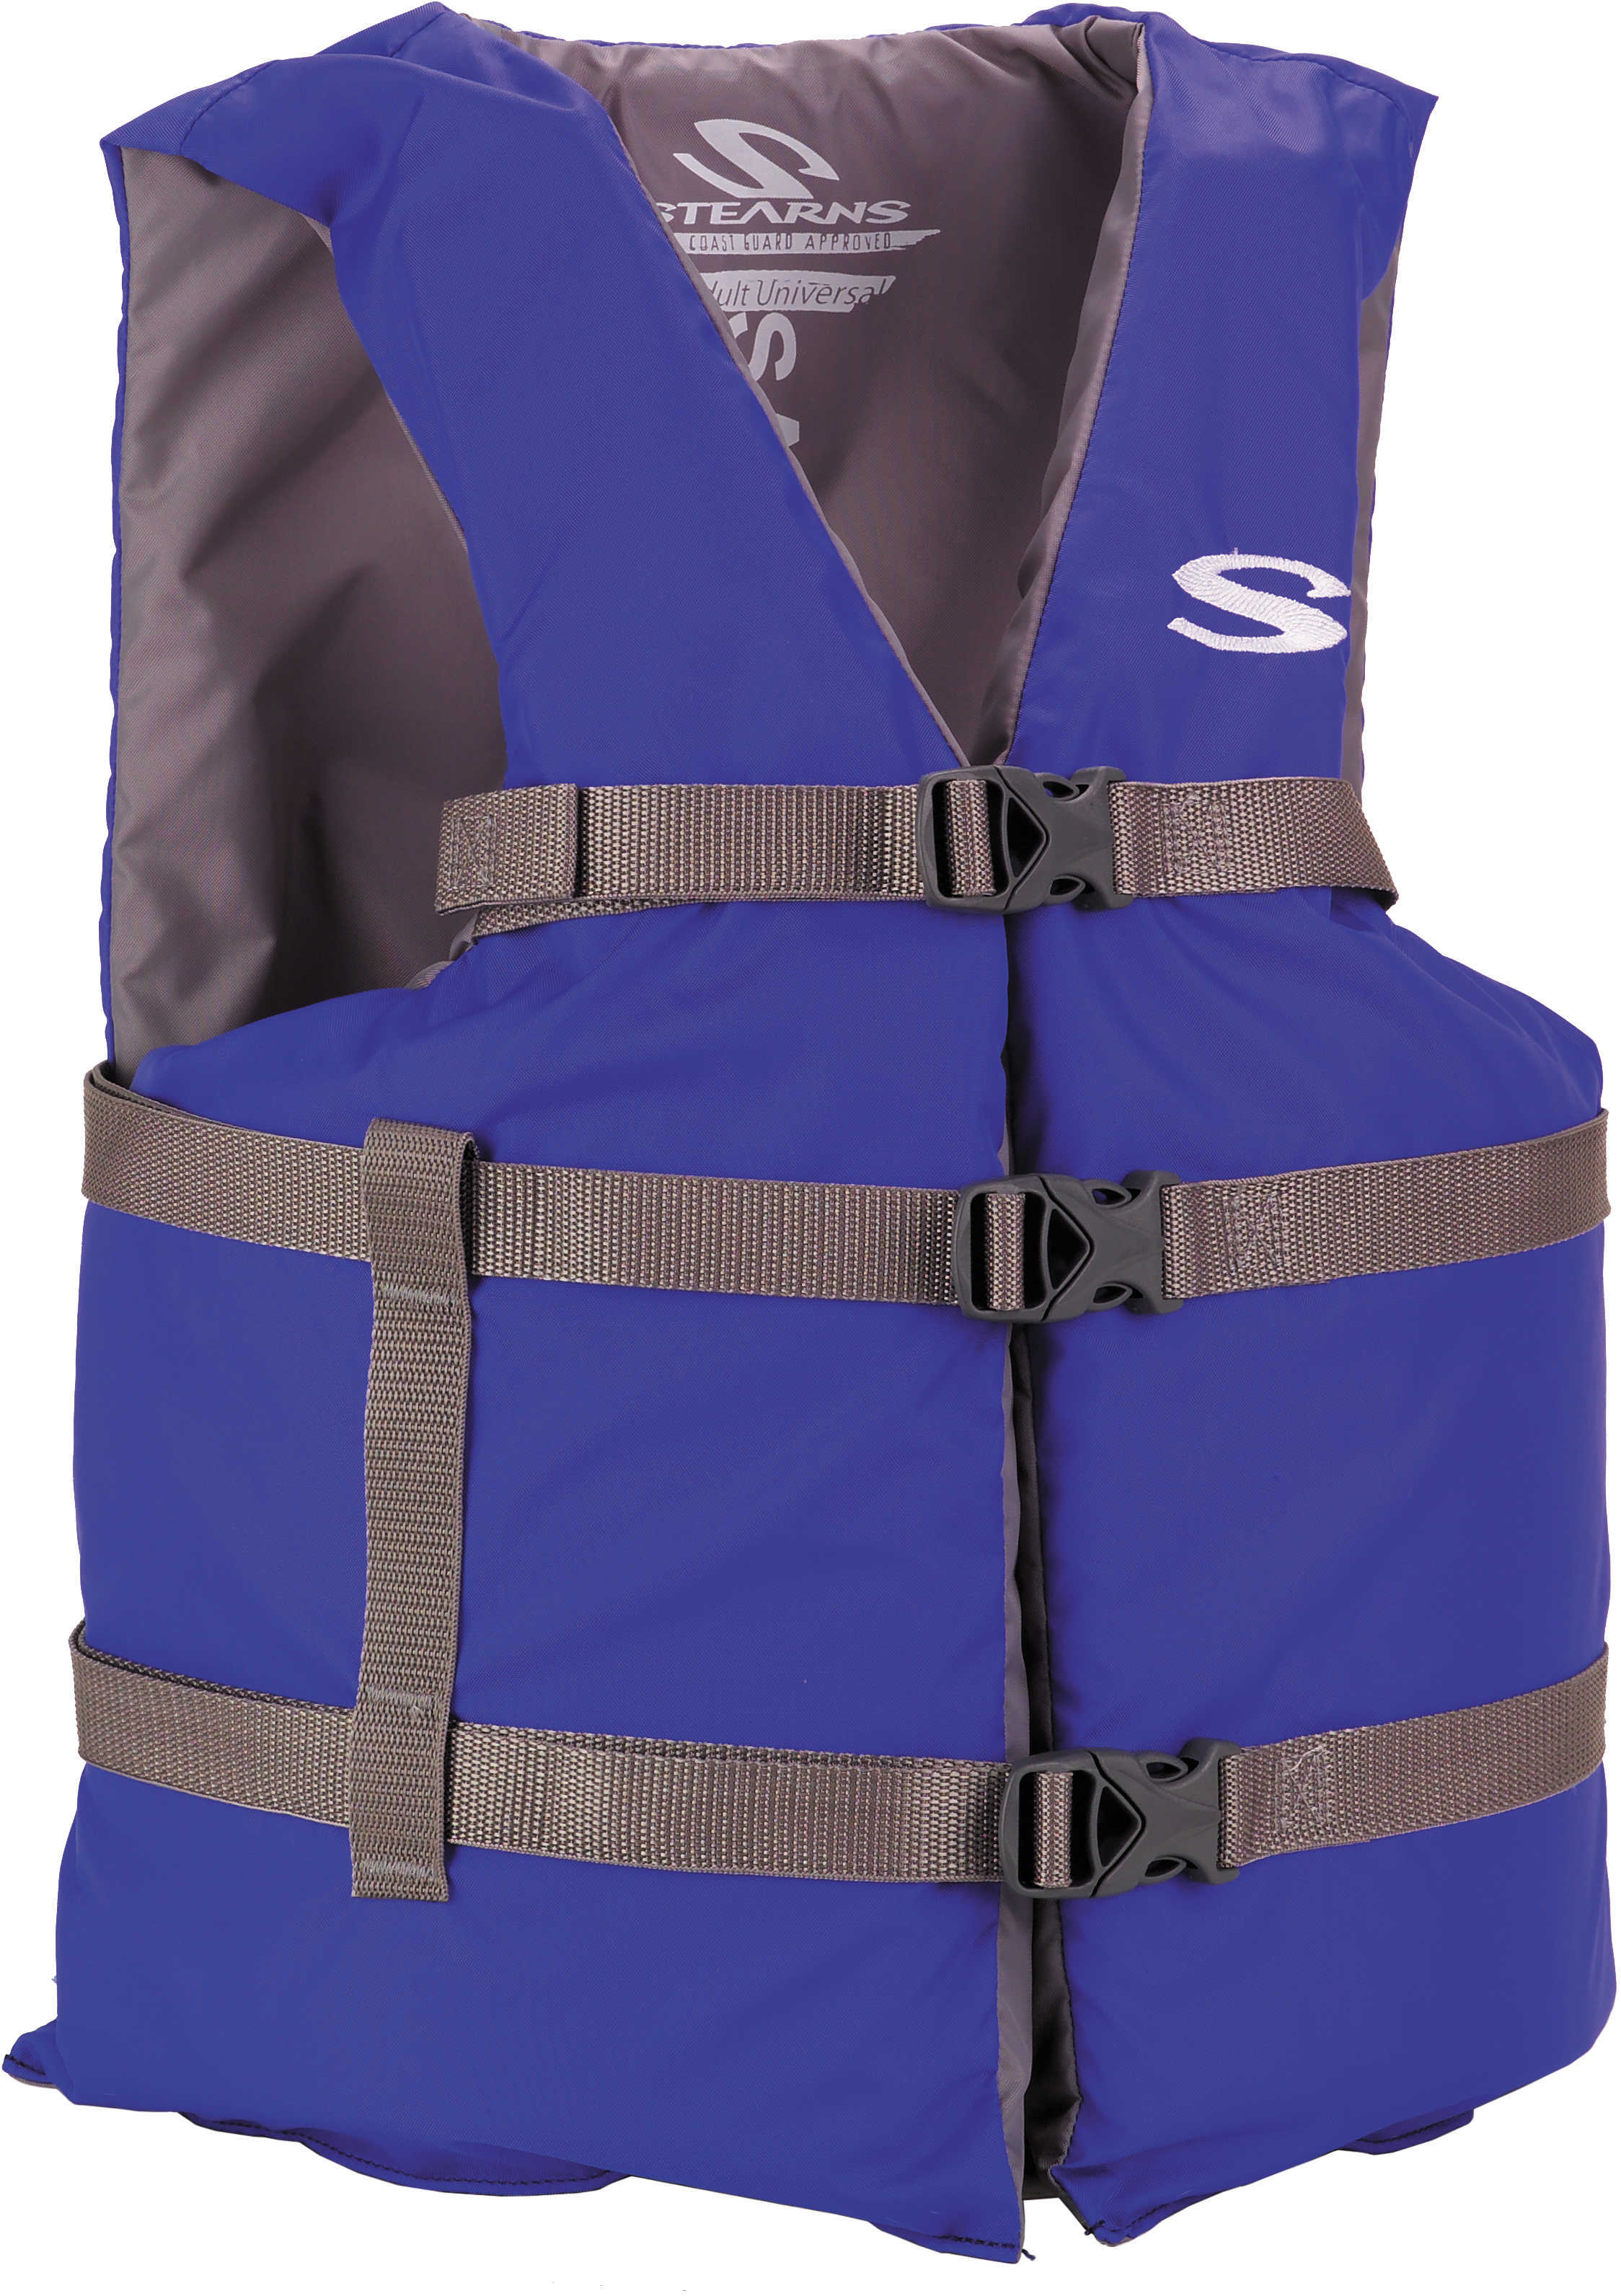 Stearns Adult Classic Boating PFD Oversized, Blue Md: 3000001685